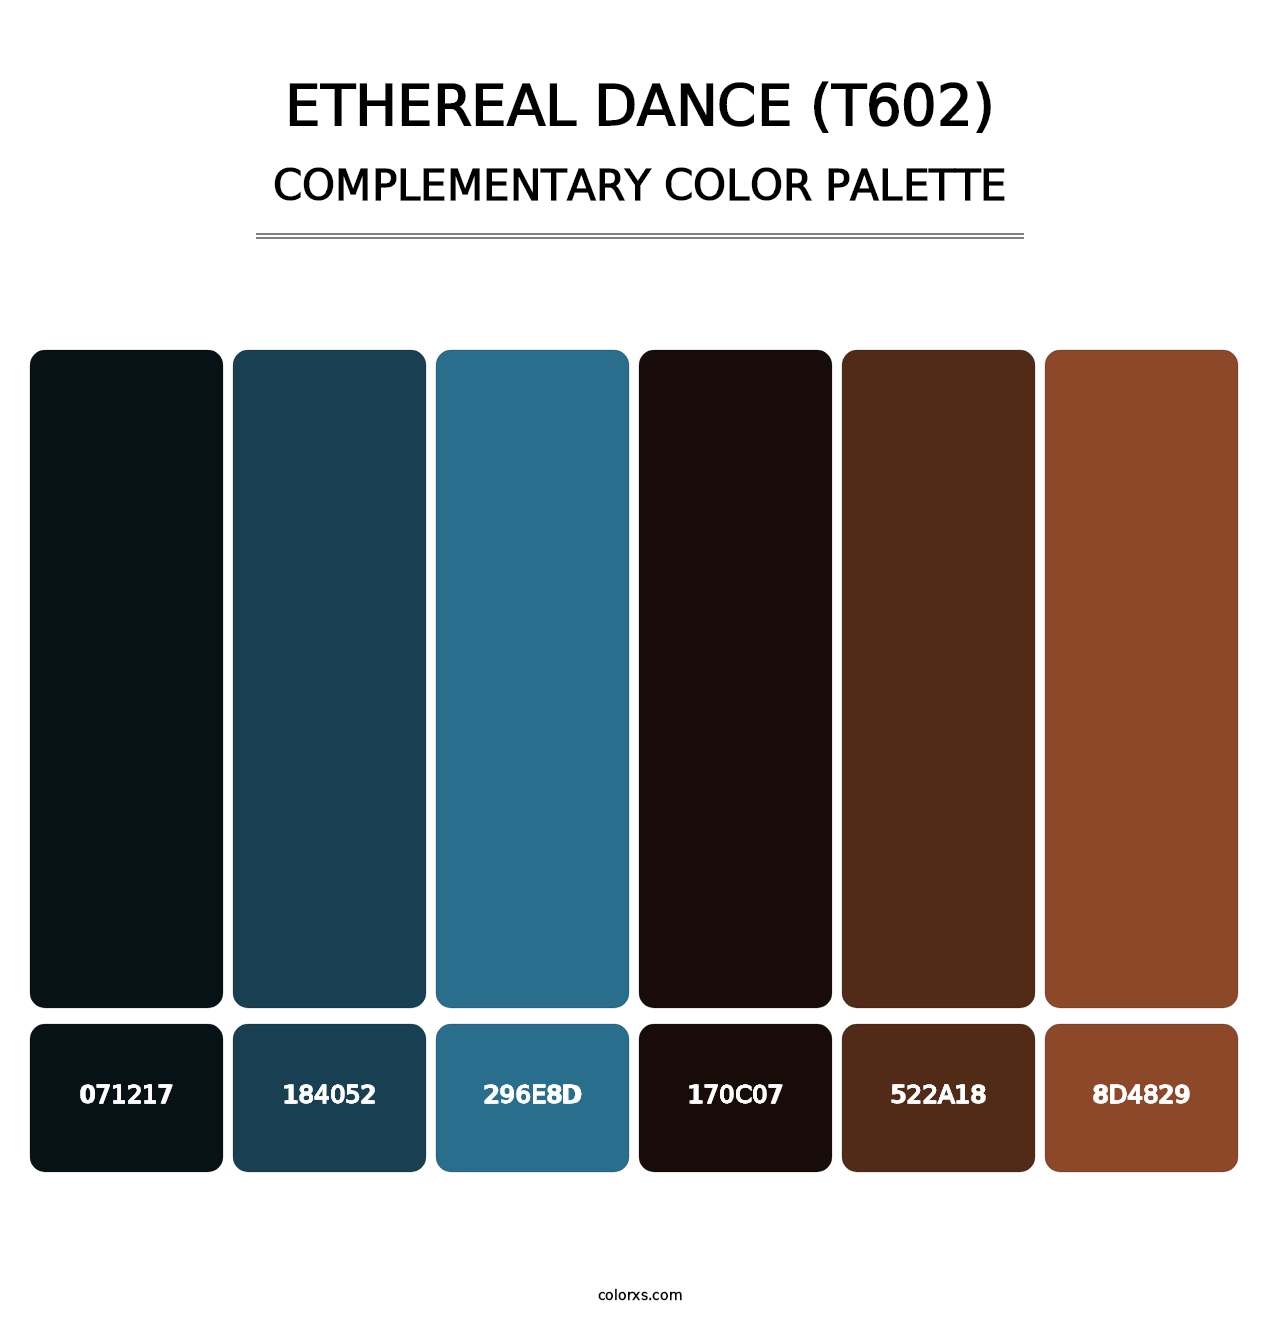 Ethereal Dance (T602) - Complementary Color Palette